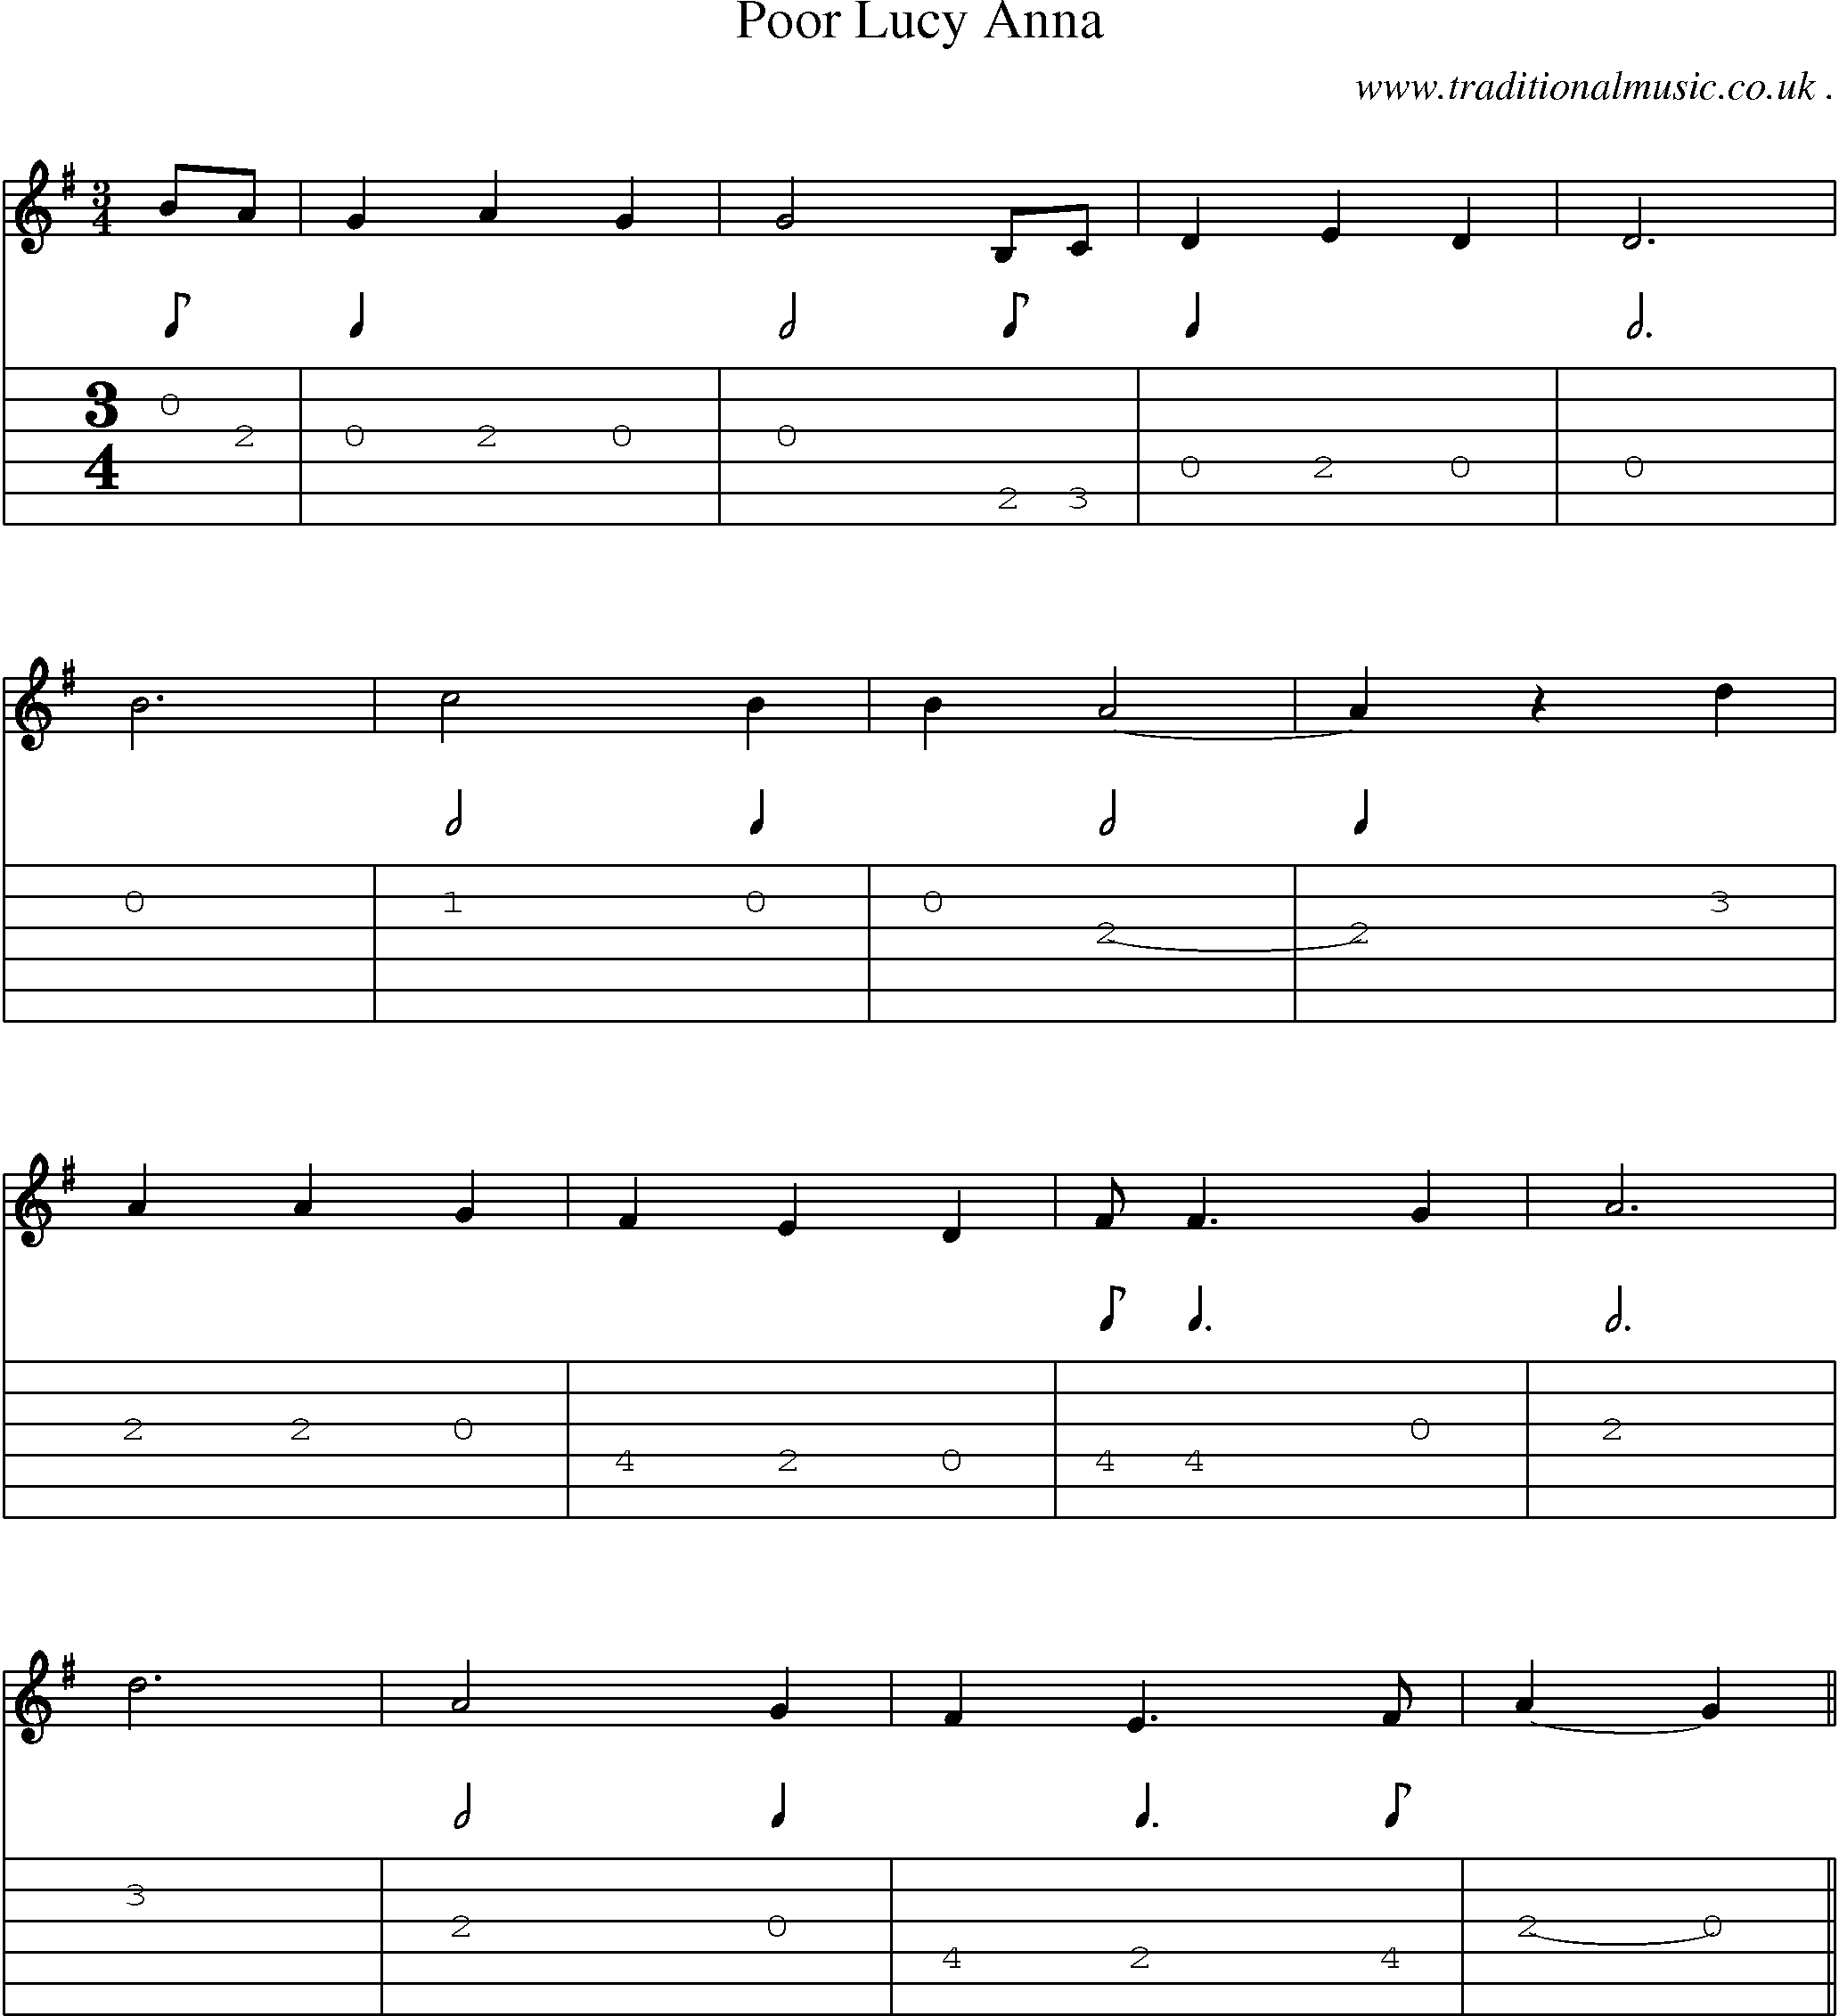 Sheet-Music and Guitar Tabs for Poor Lucy Anna